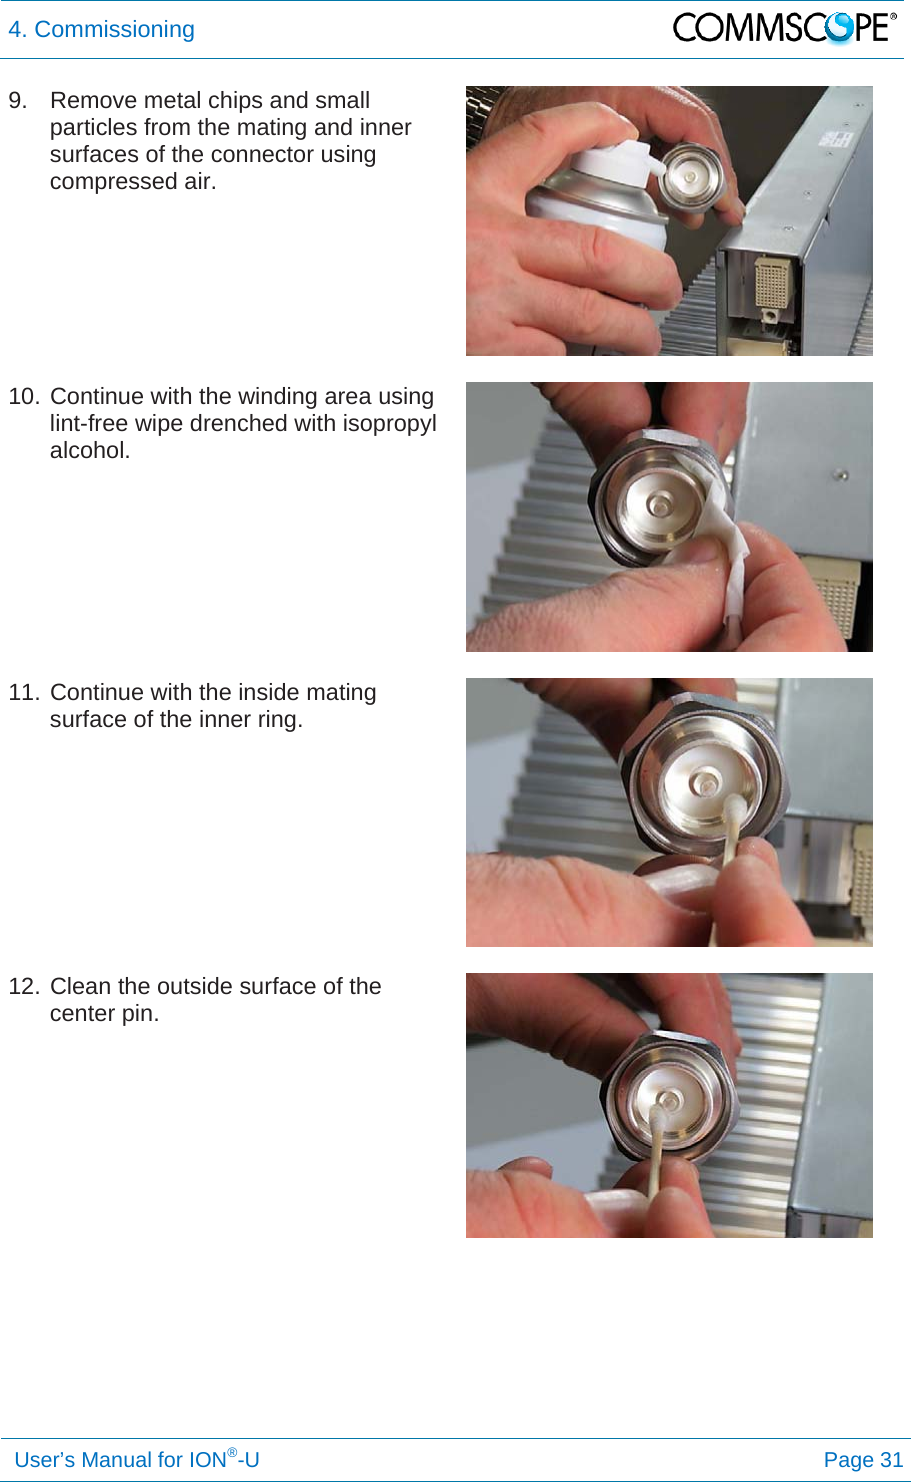 4. Commissioning   User’s Manual for ION®-U Page 31 9.  Remove metal chips and small particles from the mating and inner surfaces of the connector using compressed air.   10. Continue with the winding area using lint-free wipe drenched with isopropyl alcohol.   11. Continue with the inside mating surface of the inner ring.   12. Clean the outside surface of the center pin. 